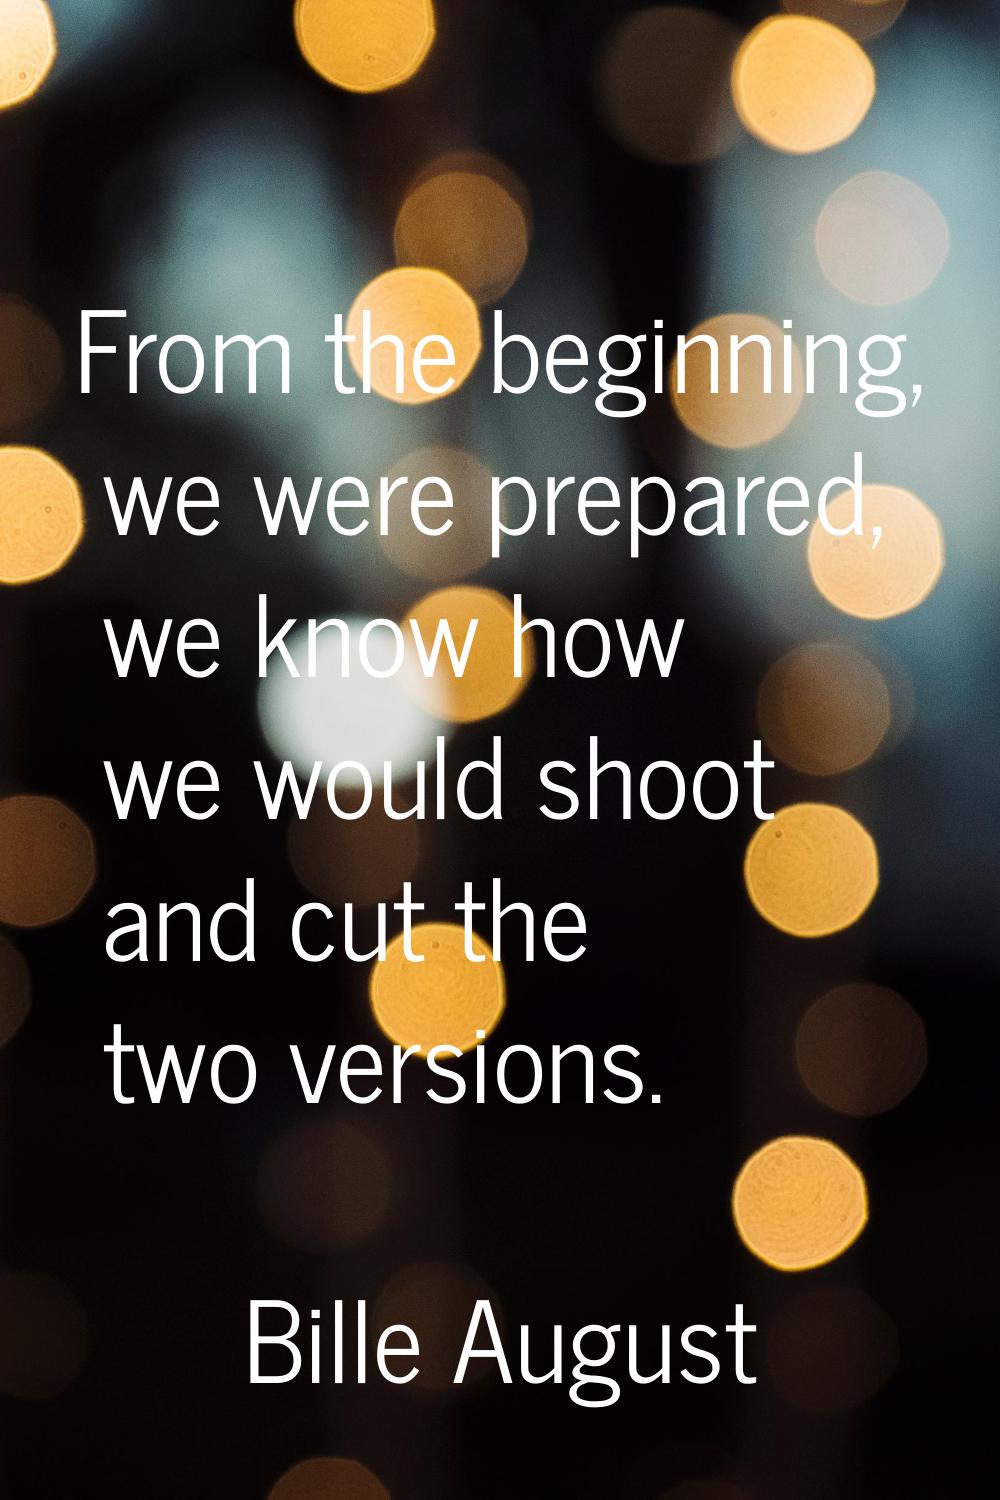 From the beginning, we were prepared, we know how we would shoot and cut the two versions.